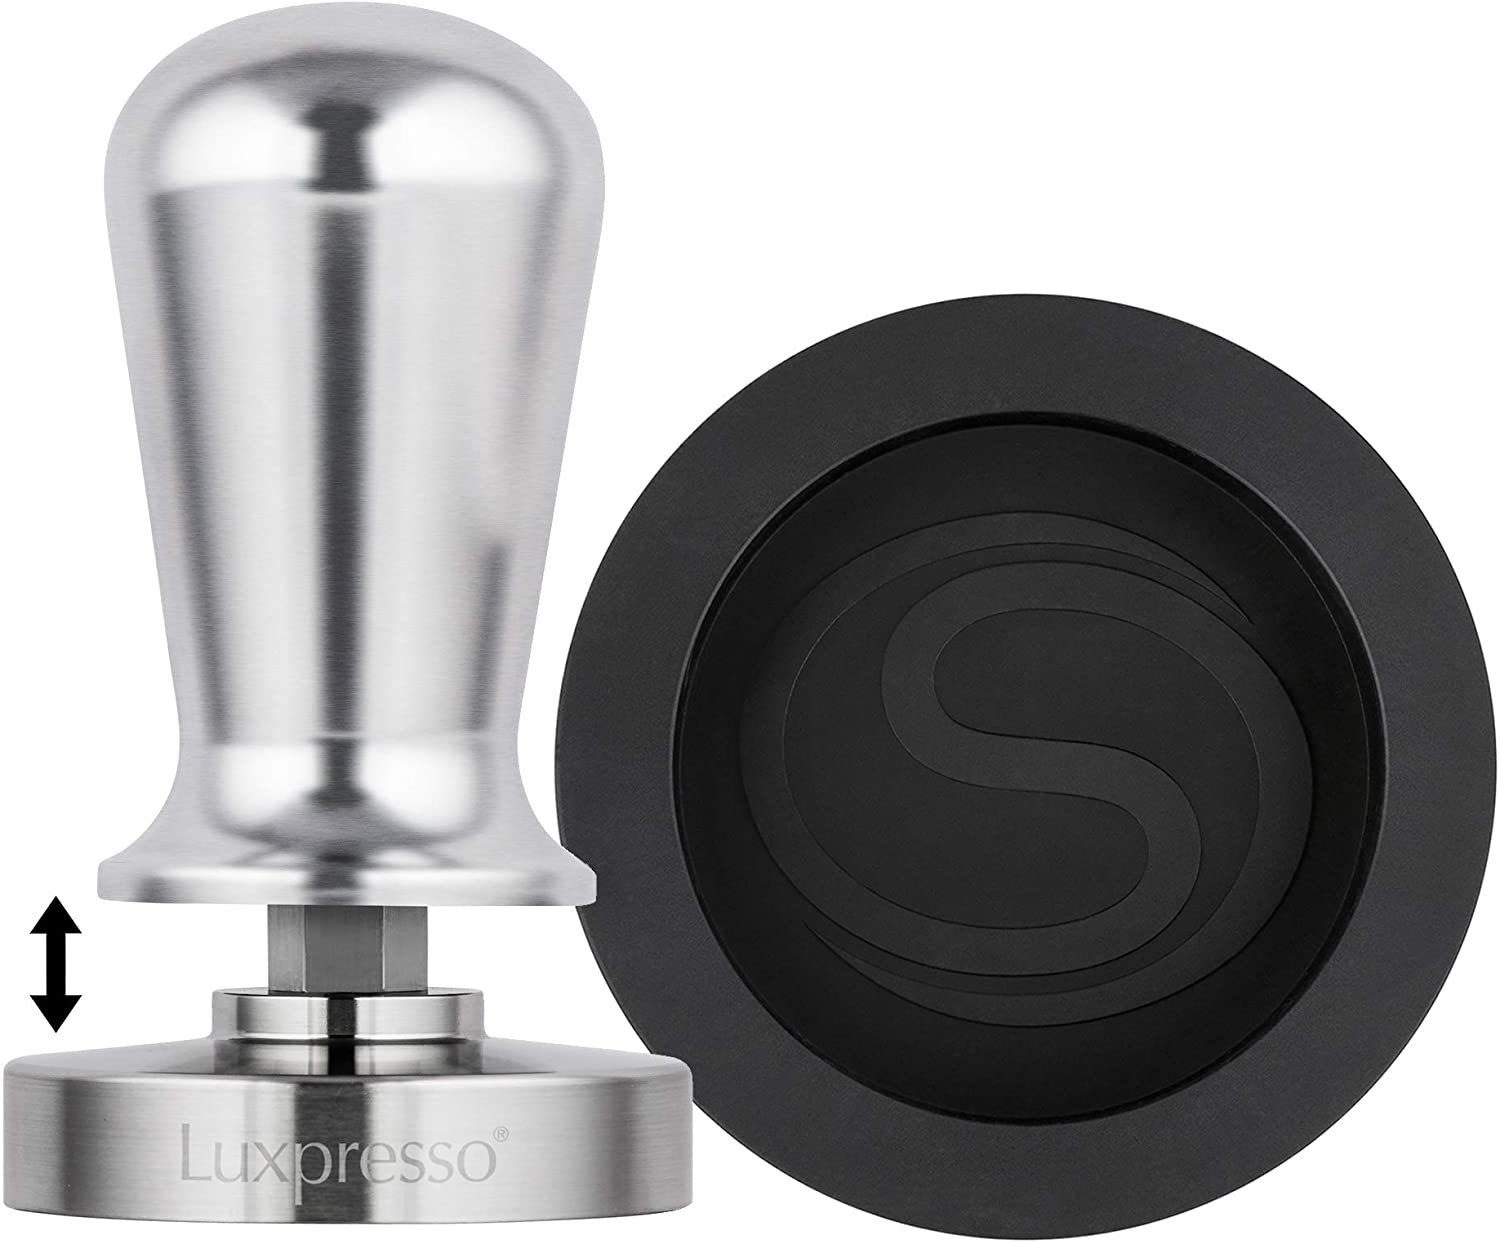 Luxpresso Tamper Stainless Steel 51 mm with Rotonda Tamper Mat / Press Station Various Design